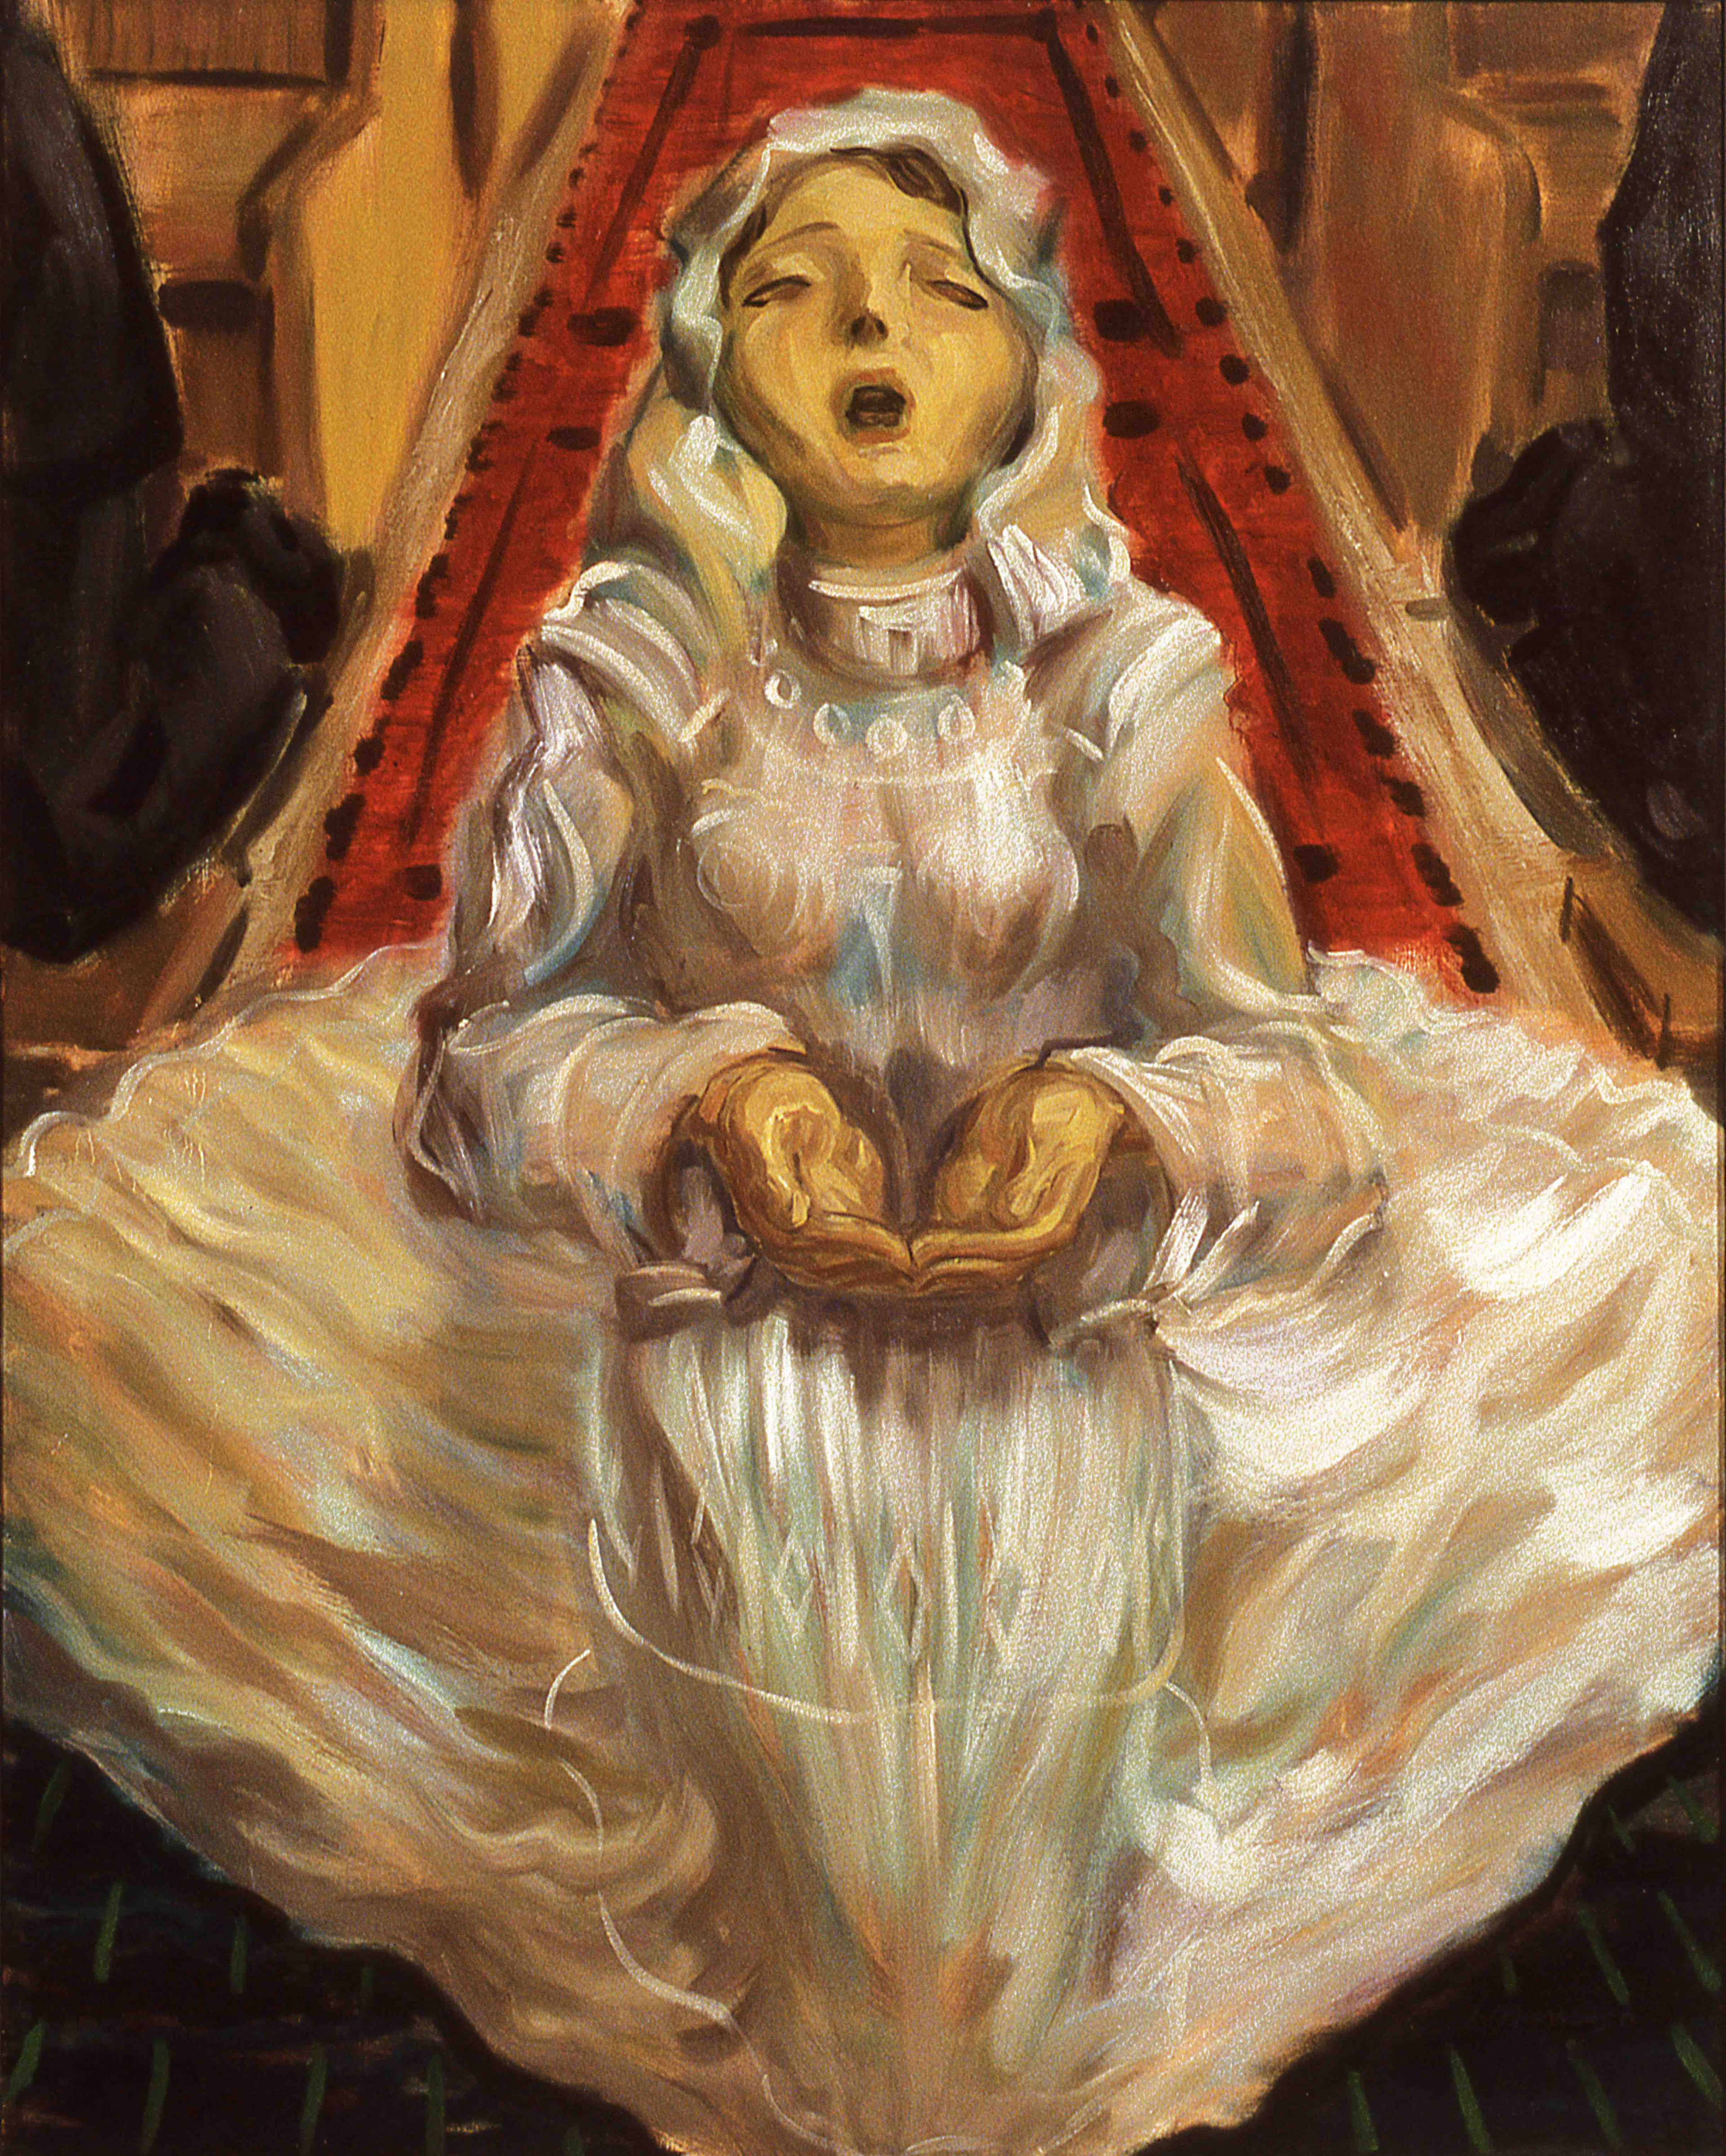 THE FIRST COMMUNION, painted by Vince Mancuso in 1990, oil on canvas 4x5 feet, private collection.